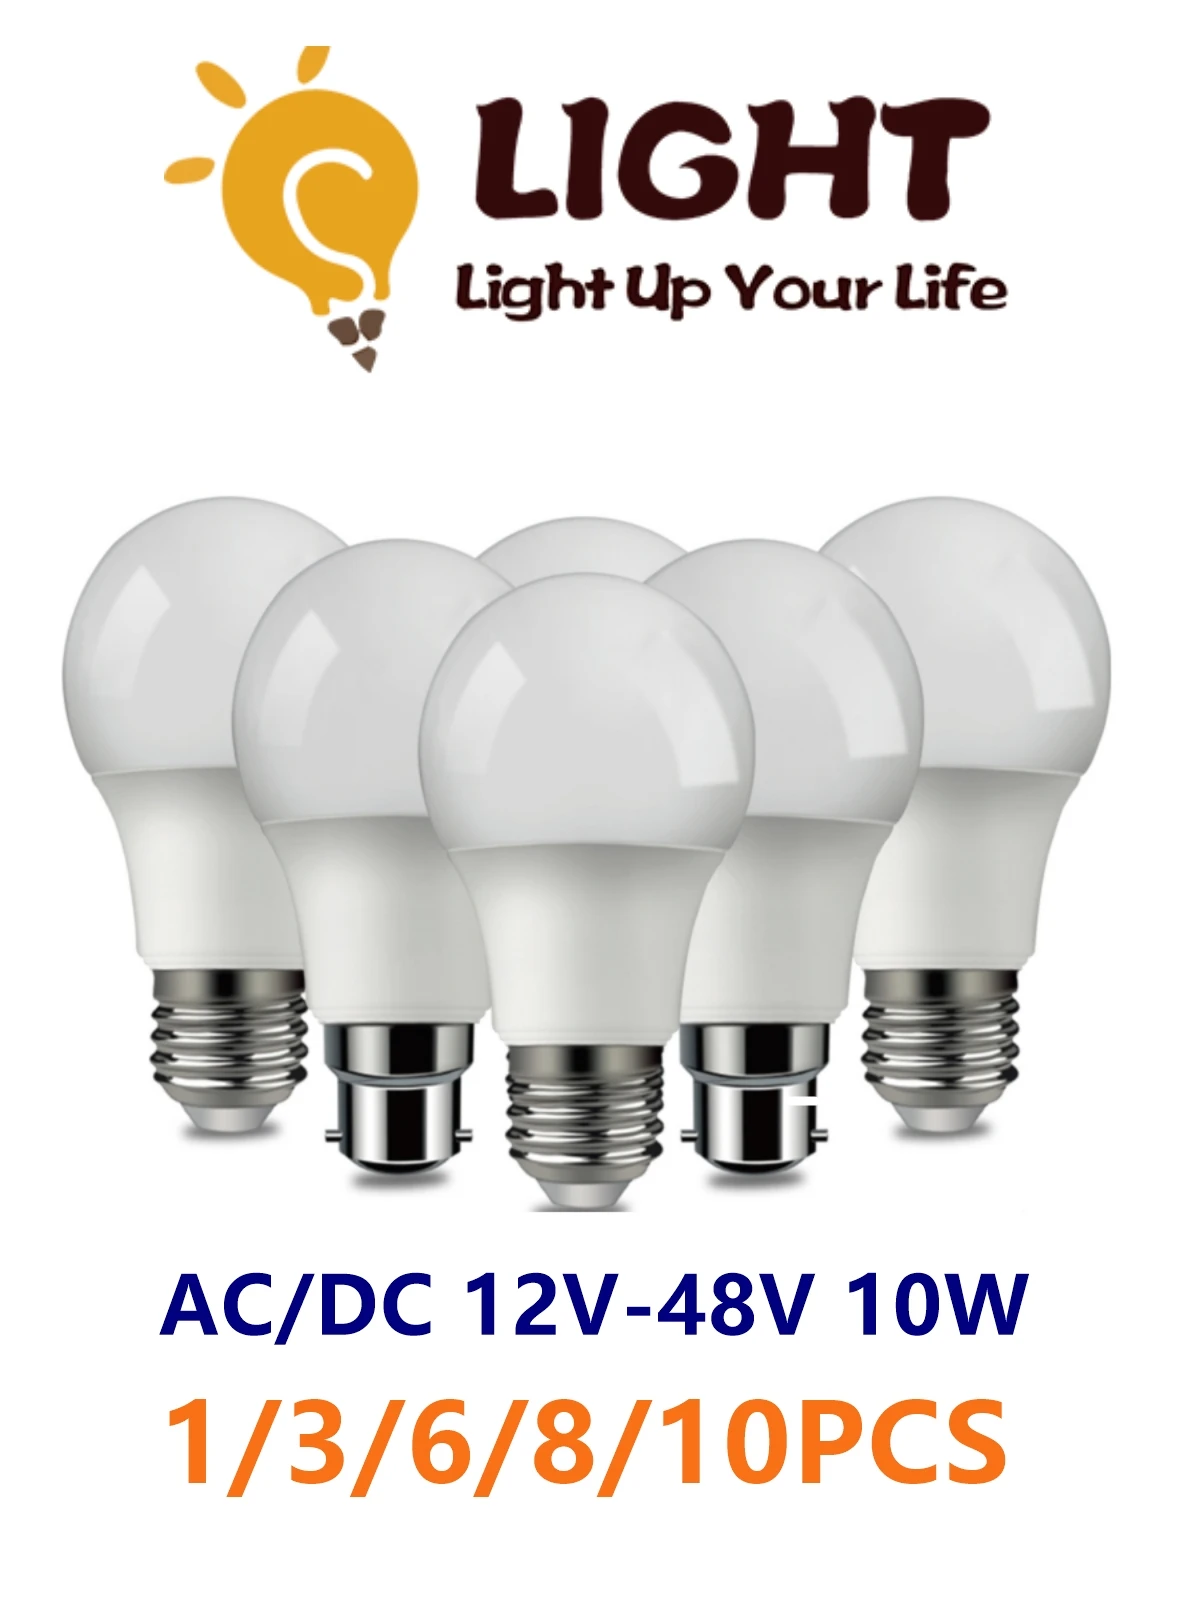 1-10pcs DC/AC 12V-48V LED Bulb A60 E27 B22 Lamps 10W Bombilla For Solar Led Light Bulbs 12 Volts Low Voltages Lamp Lighting